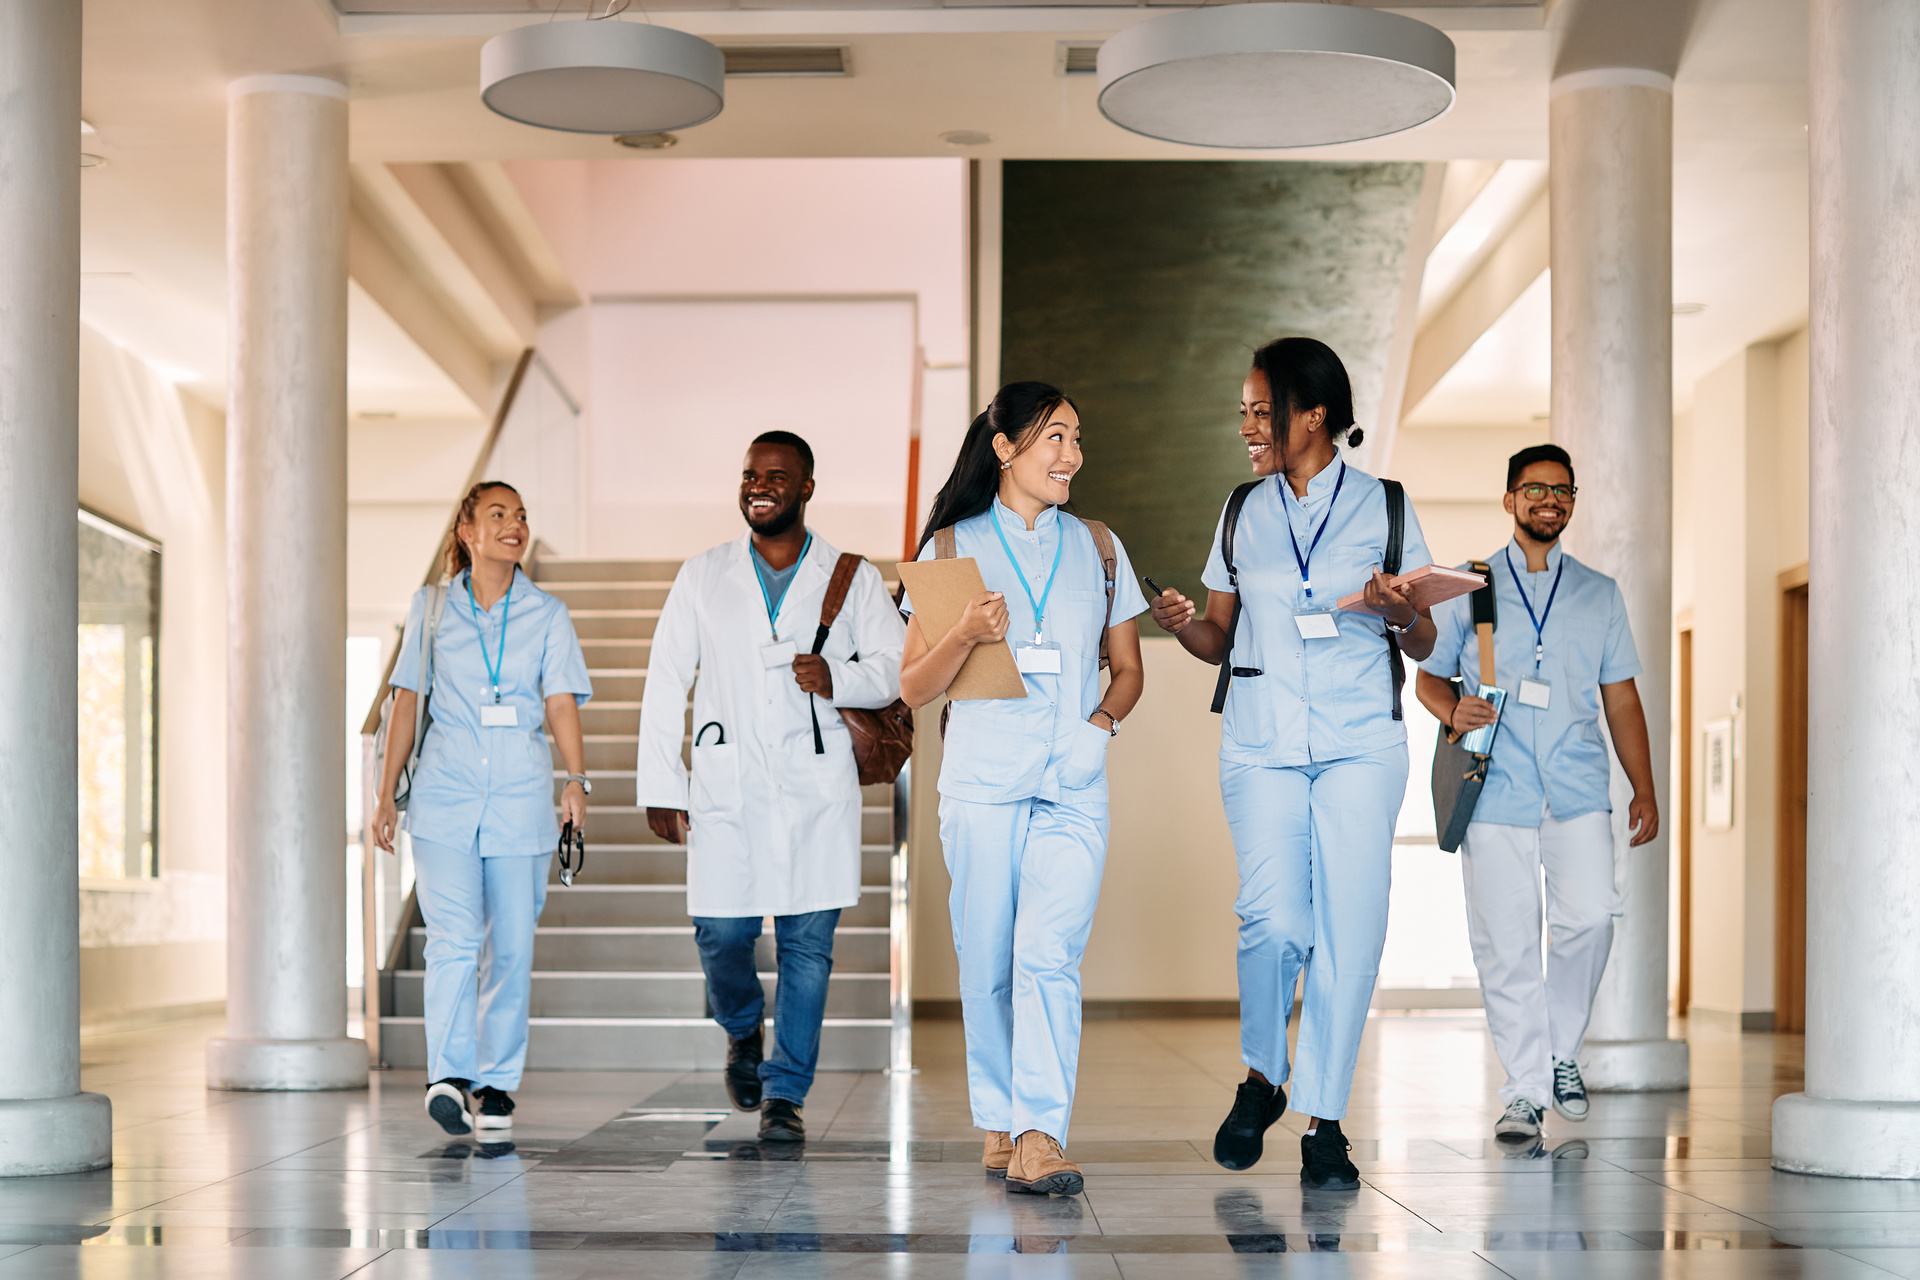 Group of happy medical and nursing students walk through hallway and talk.